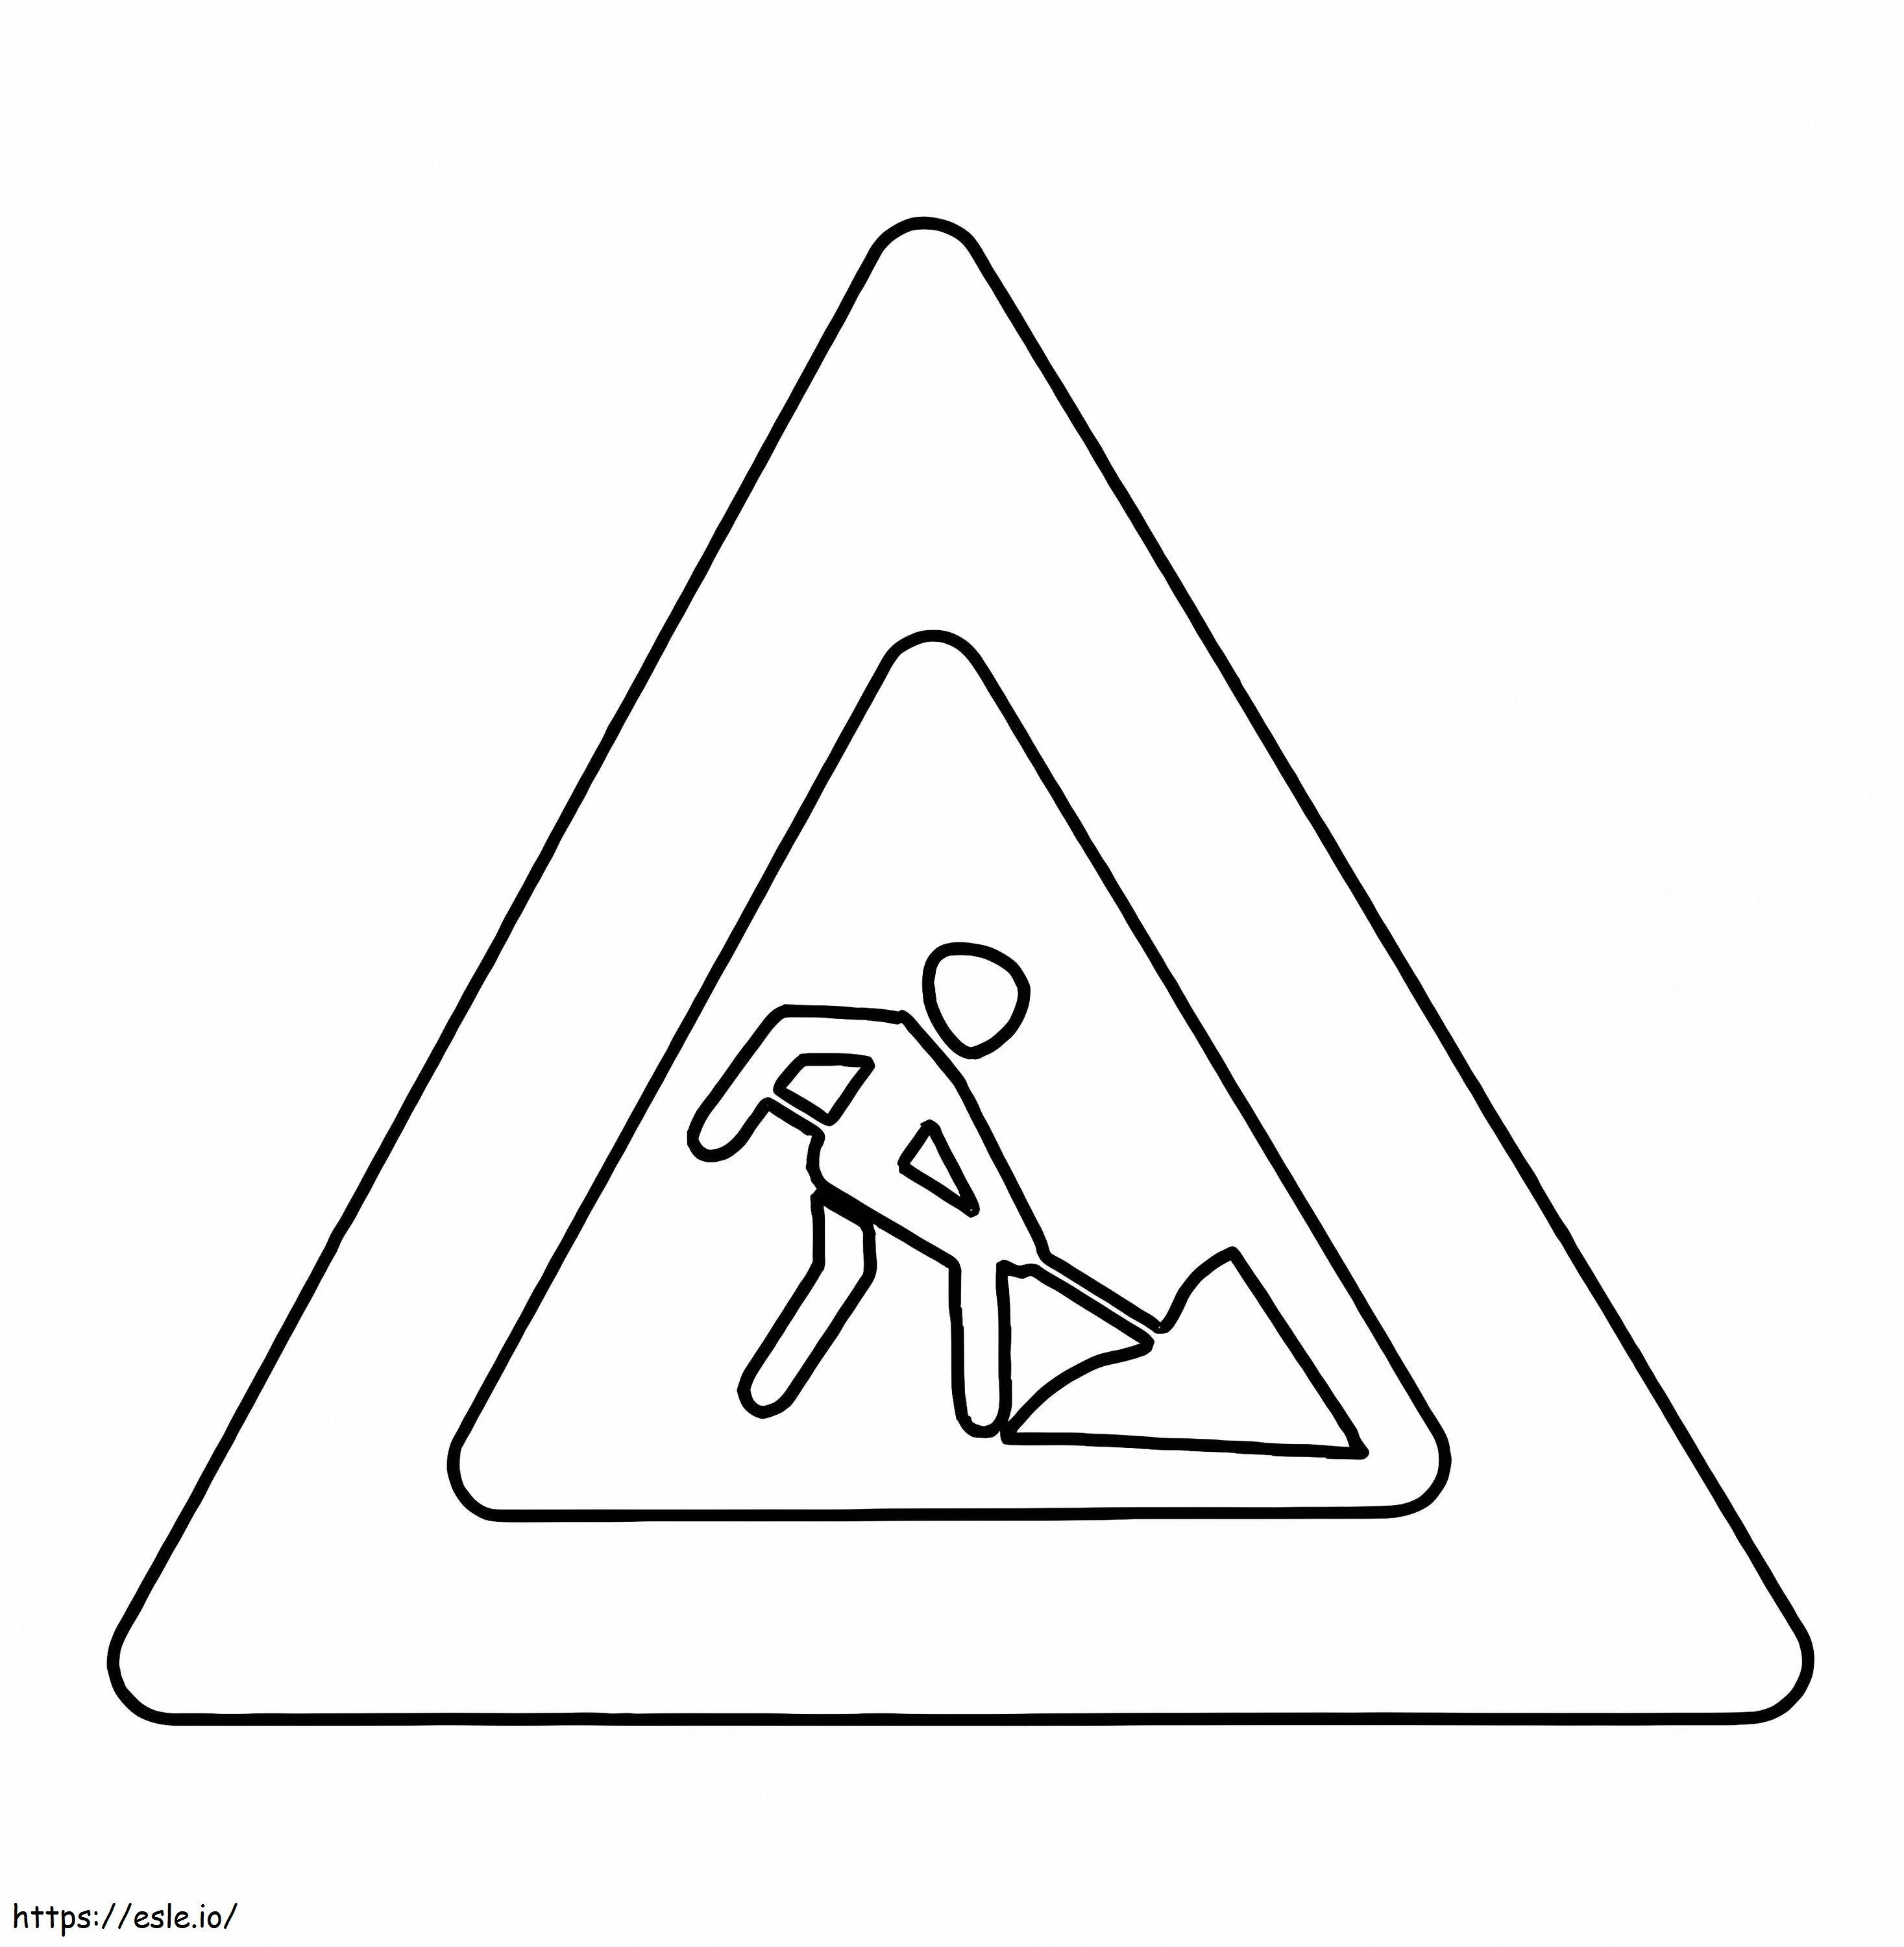 Roadworks Ahead Sign coloring page